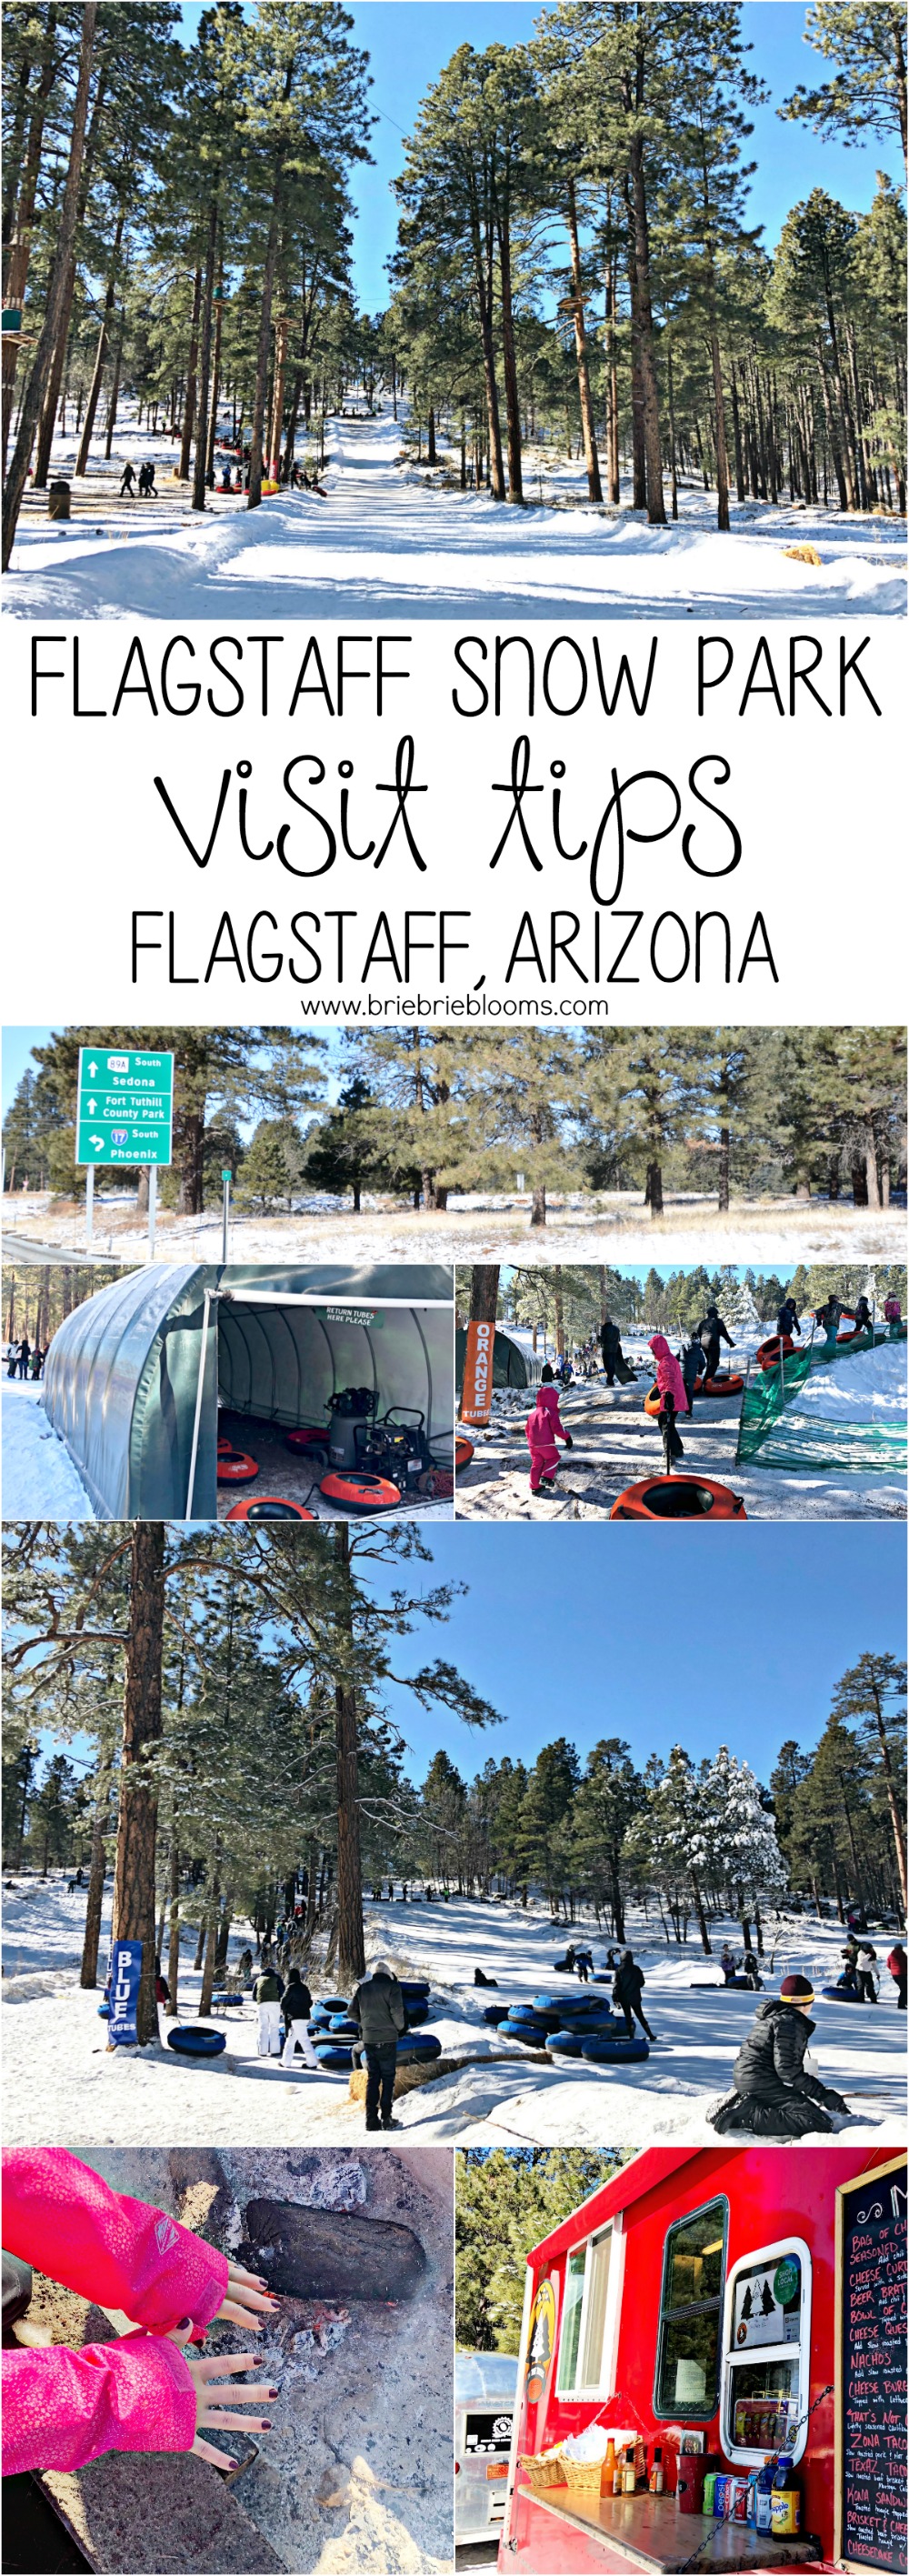 Visit the Flagstaff Snow Park in Flagstaff, Arizona for a great family snow day this season! Purchase your tickets online for guaranteed entrance.